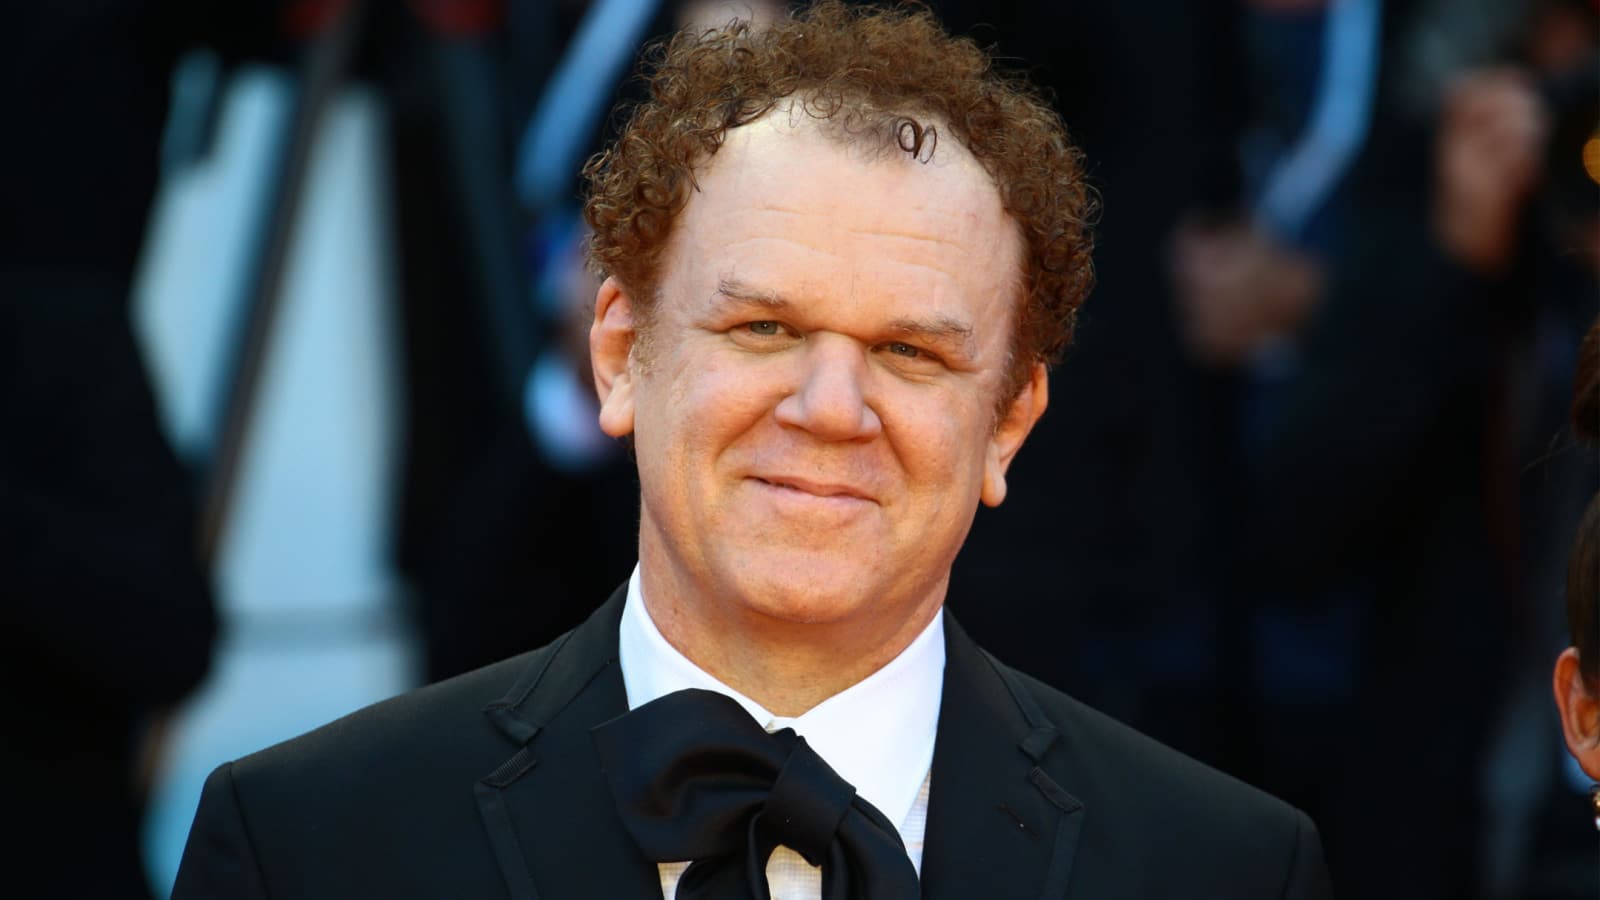 VENICE, ITALY - SEPTEMBER 02: John C. Reilly walks the red carpet ahead of the 'The Sisters Brothers' screening during the 75th Venice Film Festival on September 2, 2018 in Venice, Italy